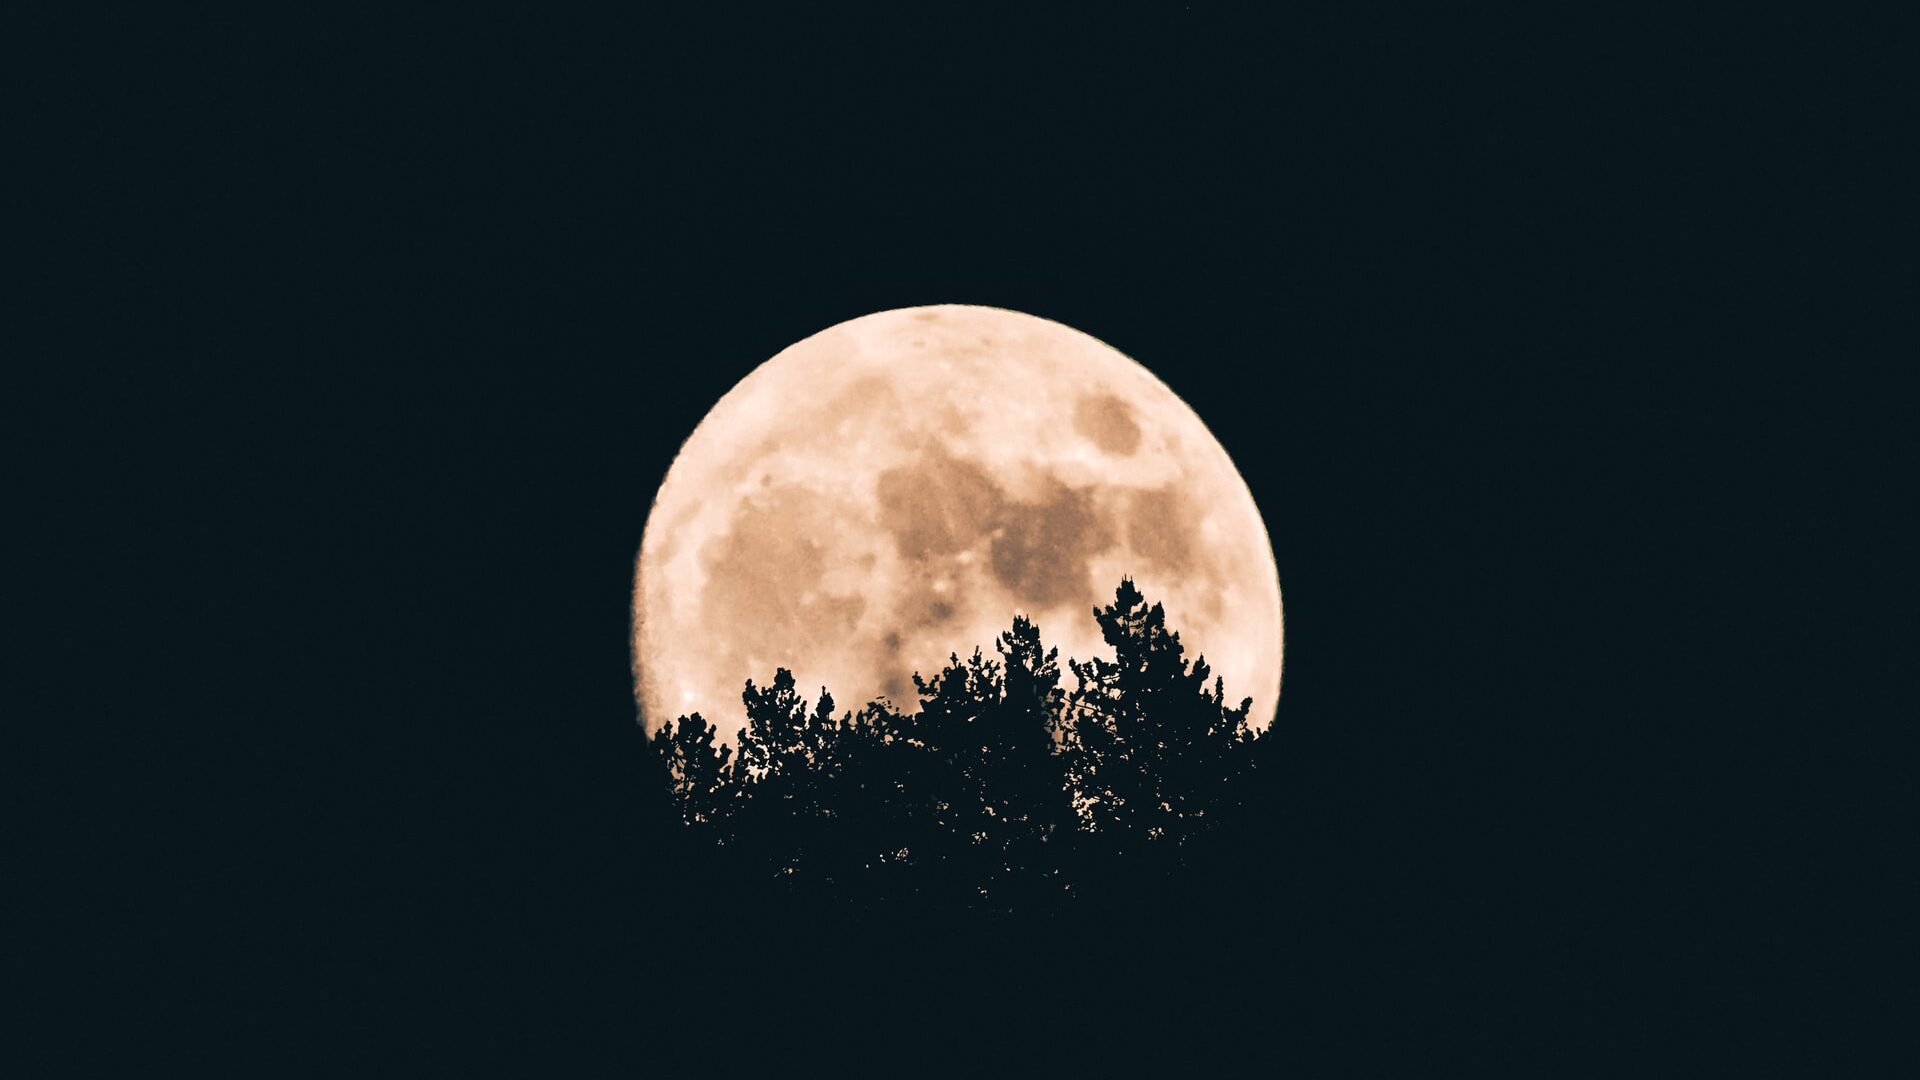 A full moon is partially obscured by treetops.